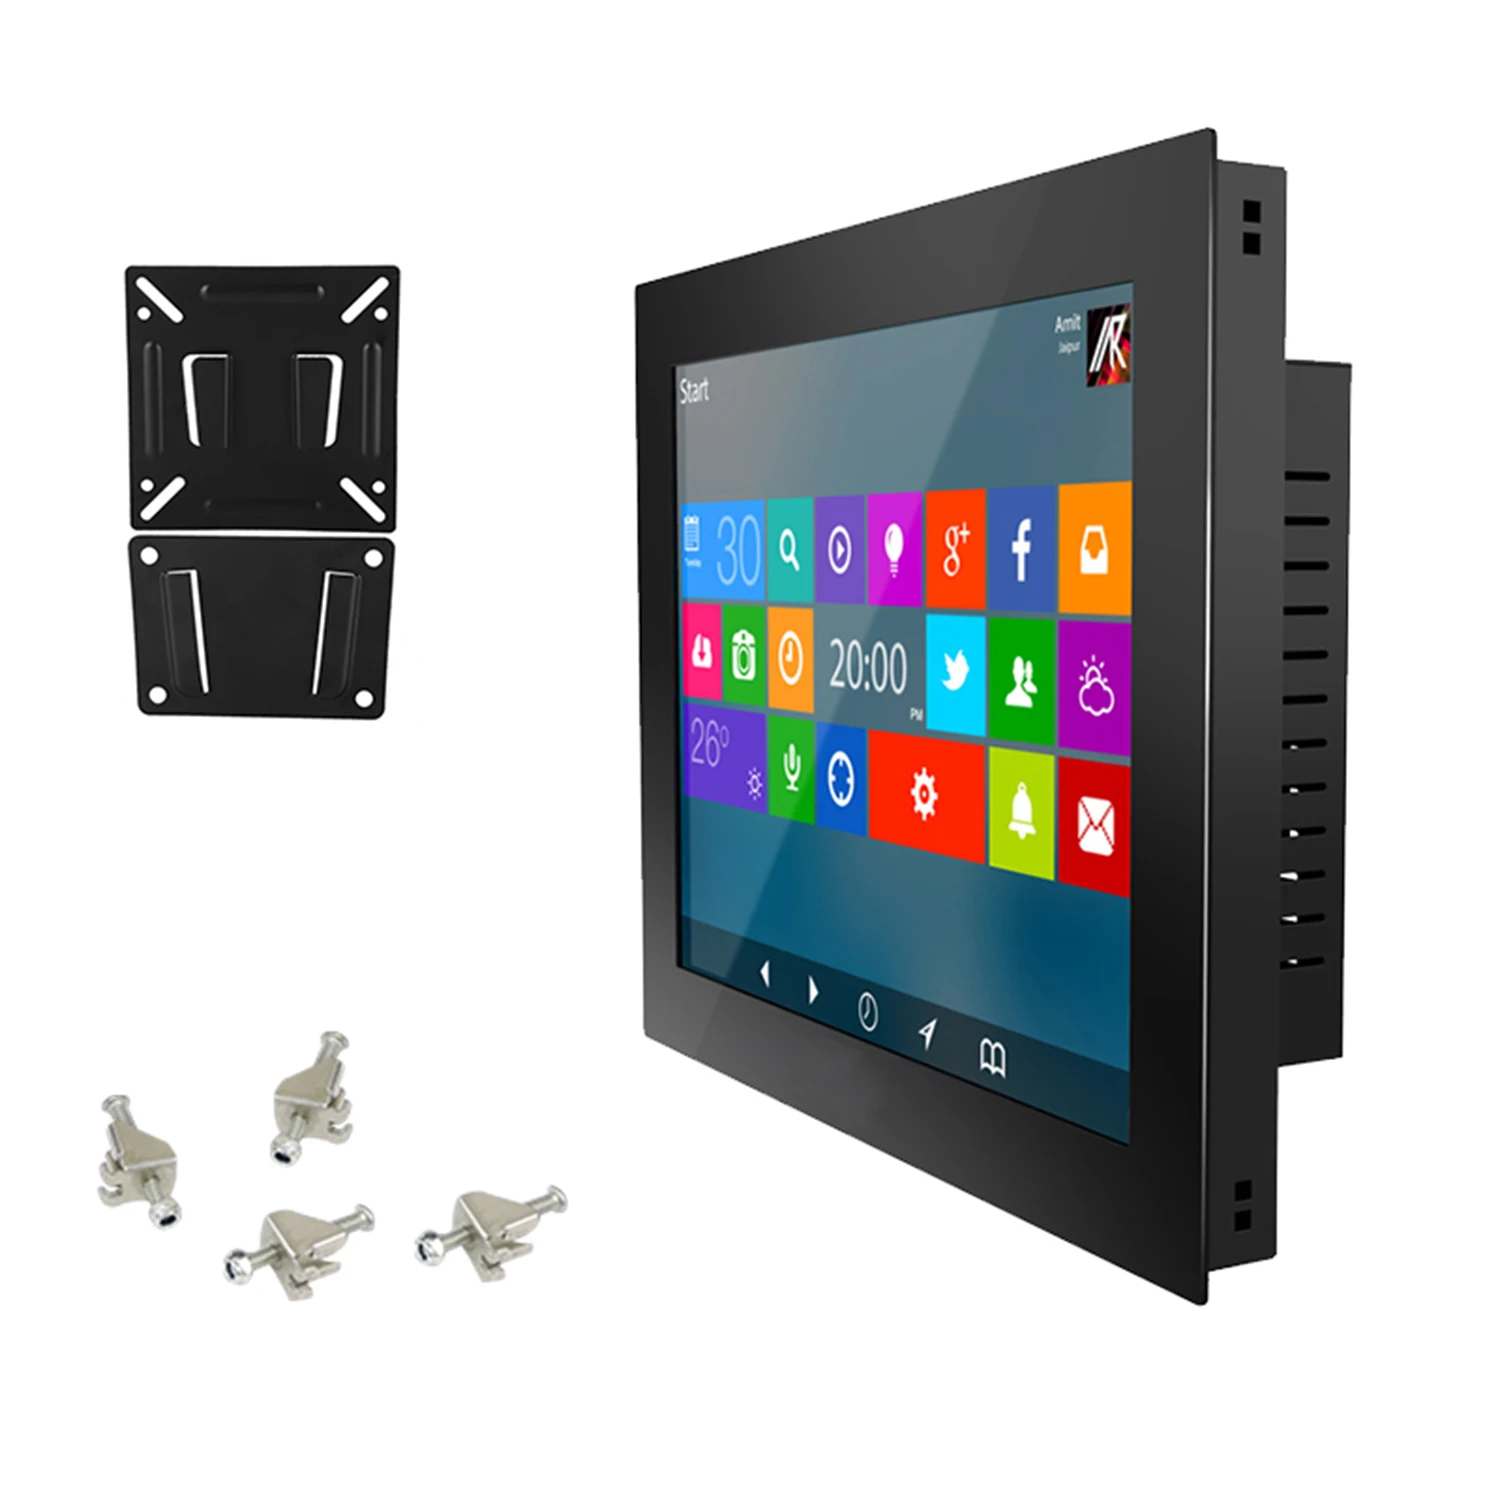 

10 12 15 Inch Buckle Embedded Industrial All in One Computer Intel Core i3 with Resistive Touch Screen Mini Tablet PC 1024*768